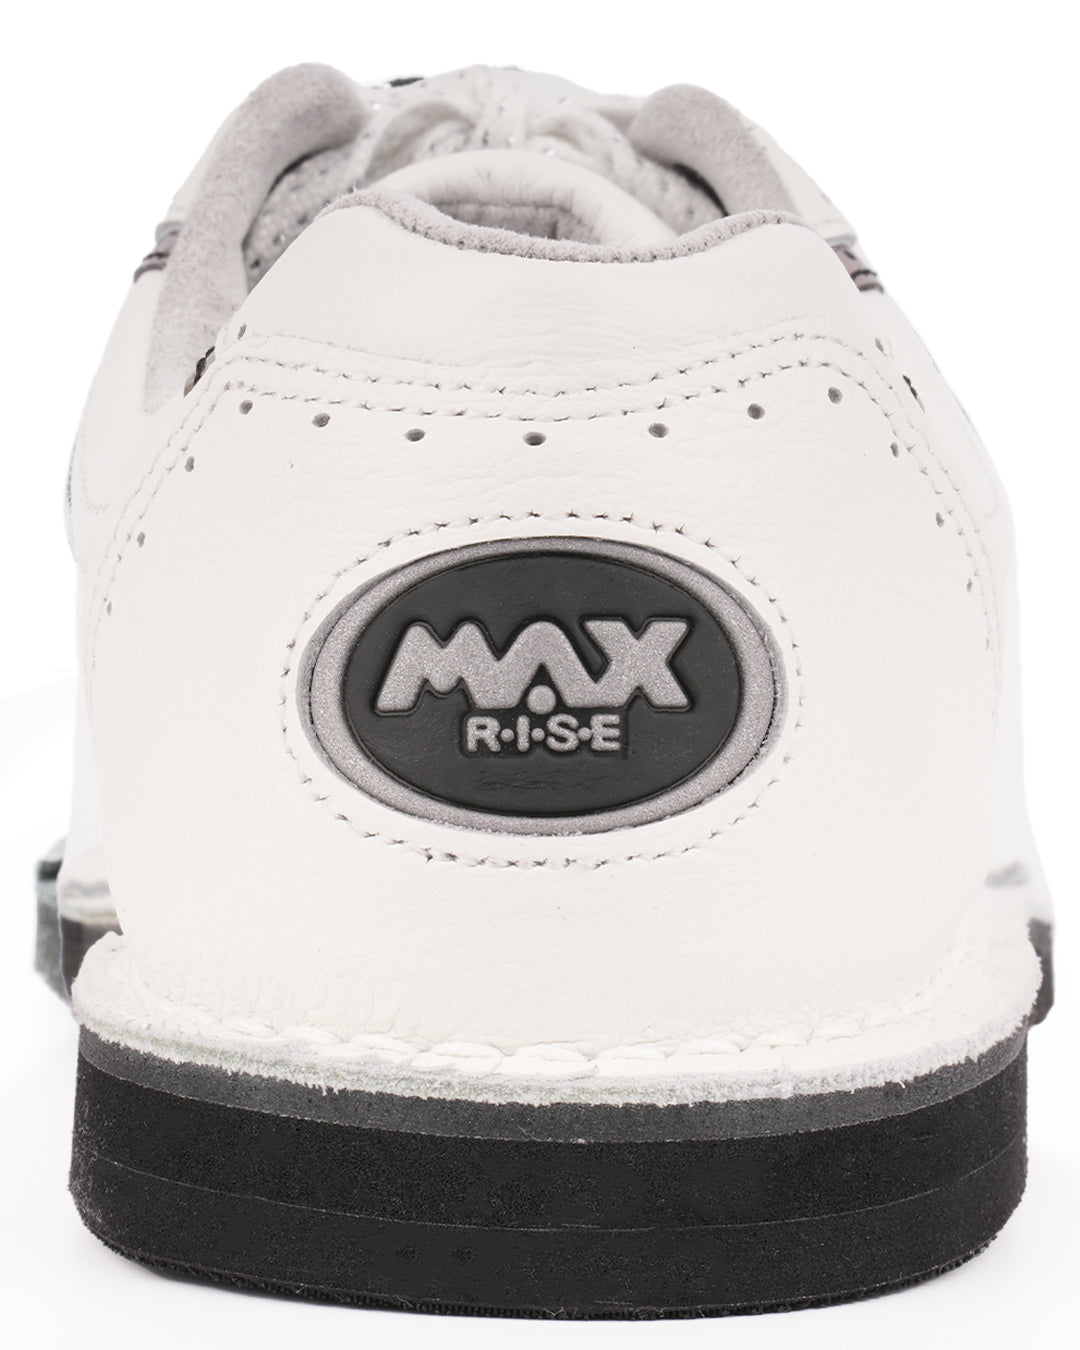 maxwelter f-5 tour bowling shoes white leather back